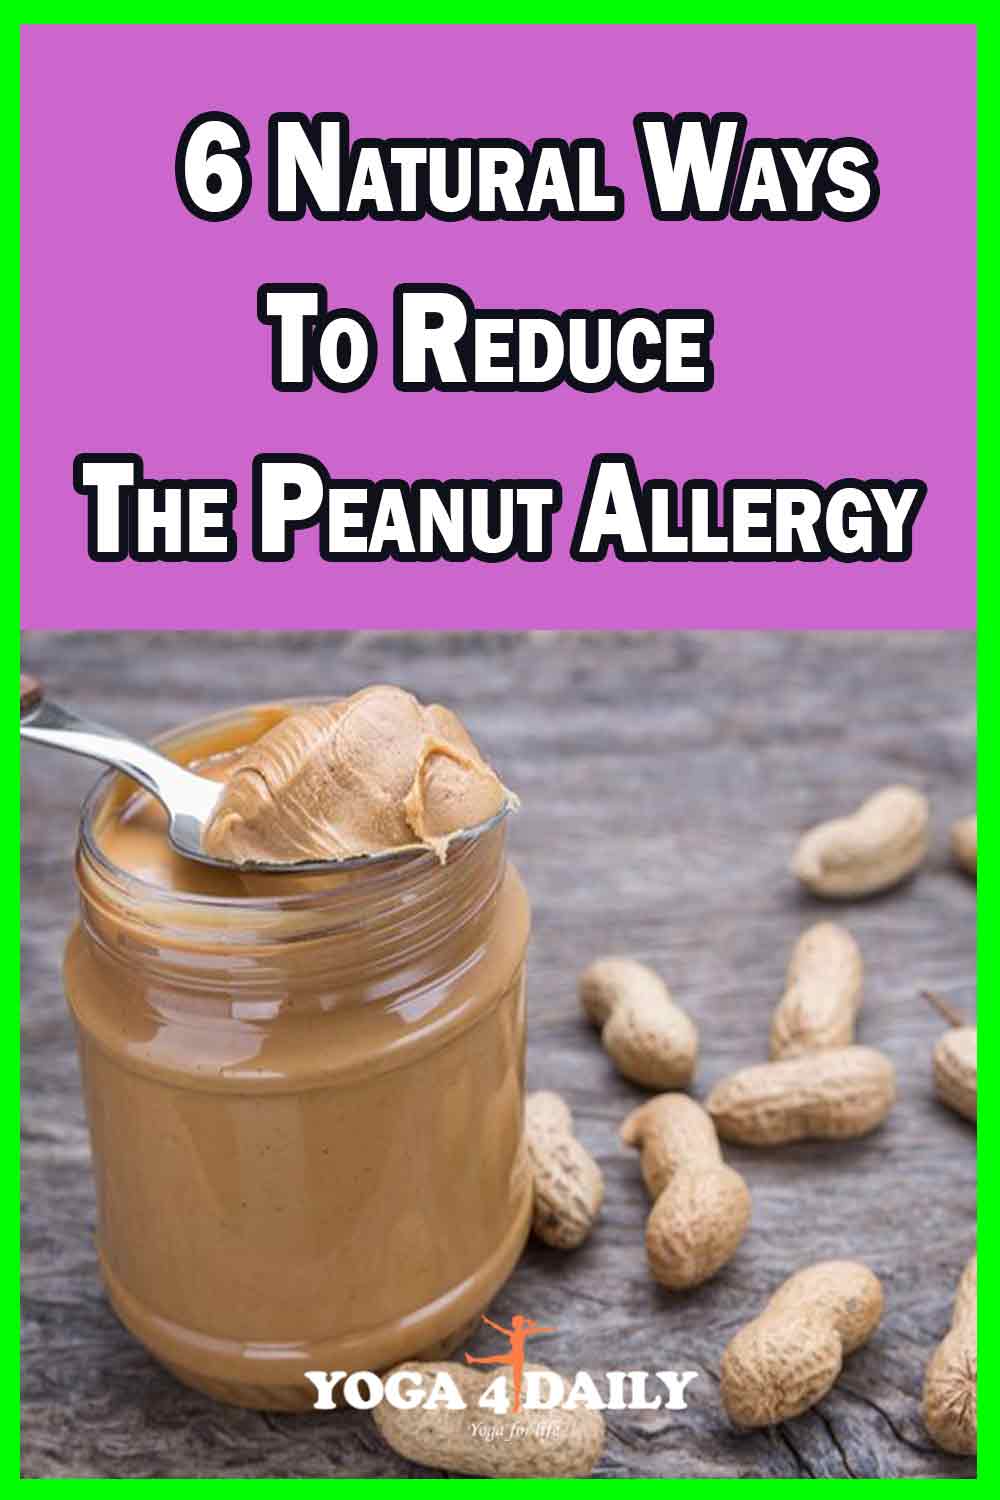 6 Natural Ways to Reduce the Peanut Allergy